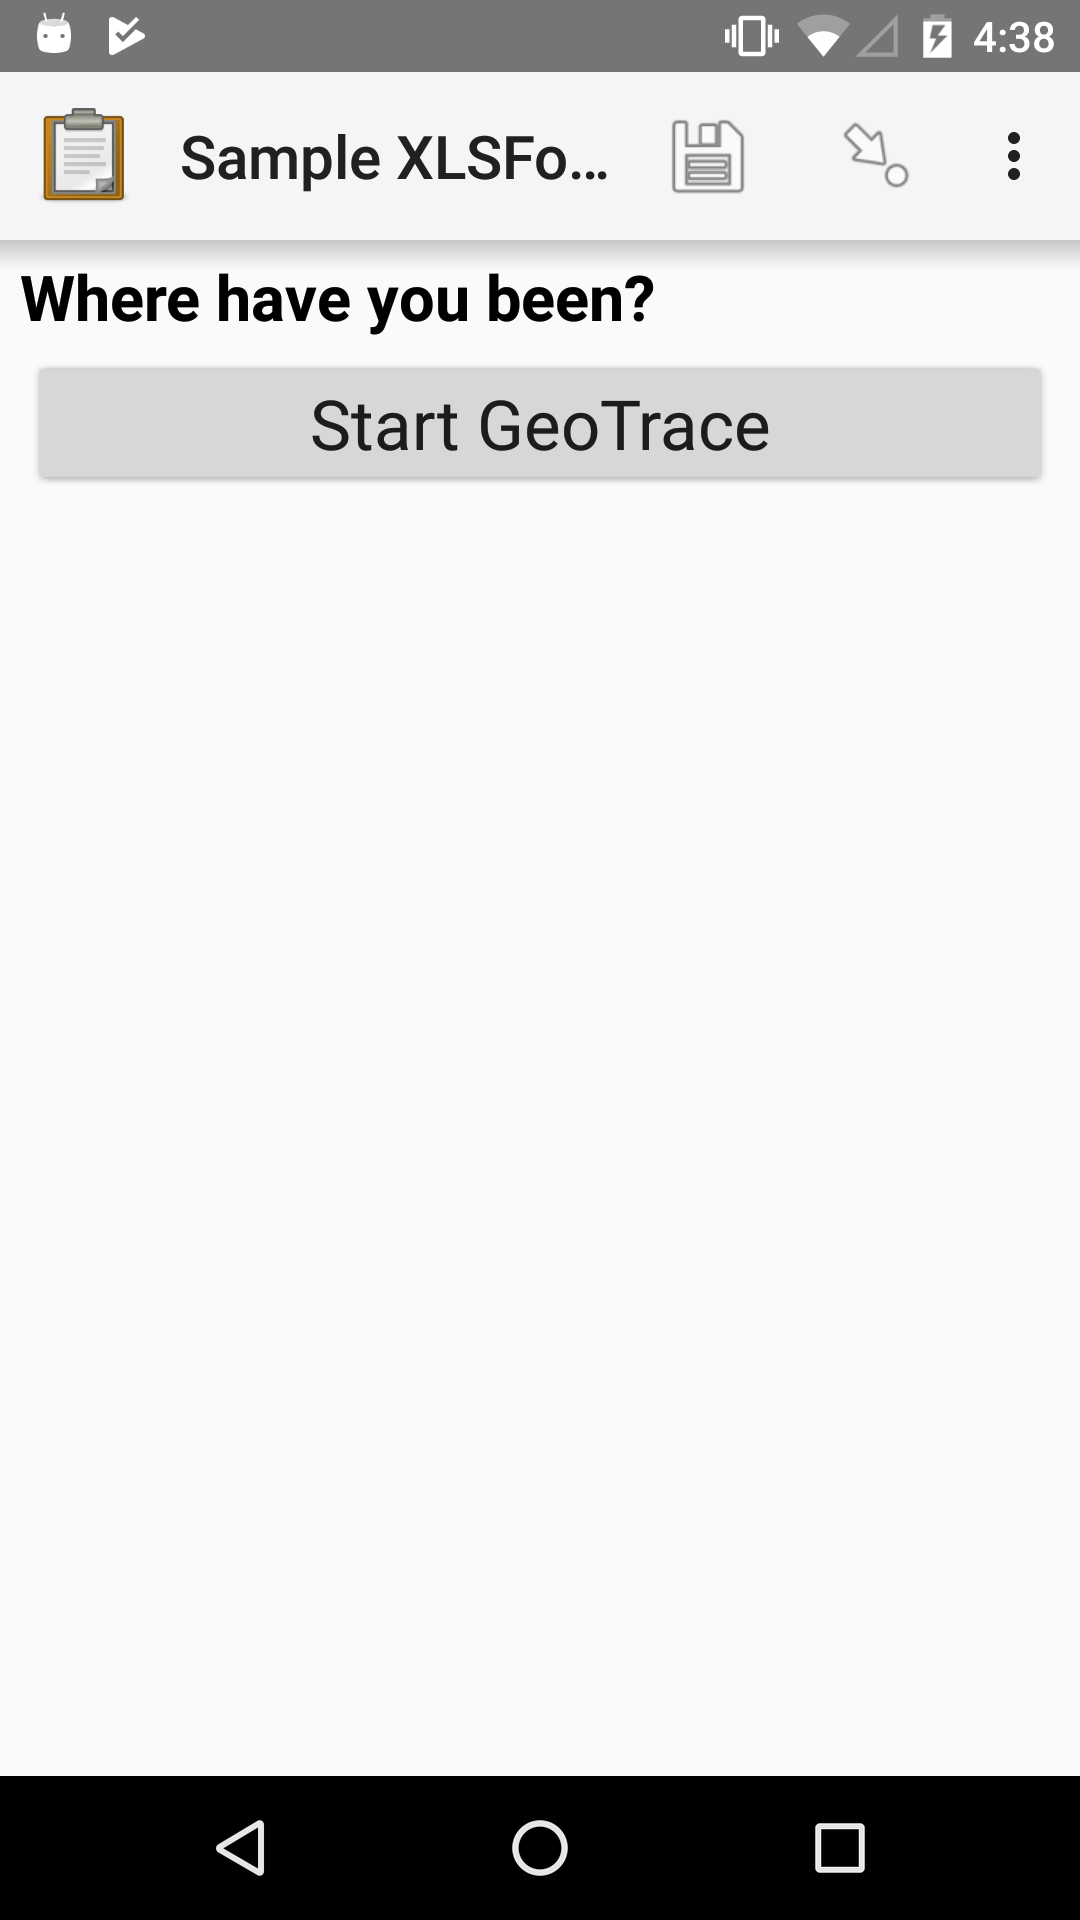 A geotrace form widget displayed in the ODK Collect app on an Android phone. The question text is "Where have you been?" and below that is a button with the label "Start GeoTrace."